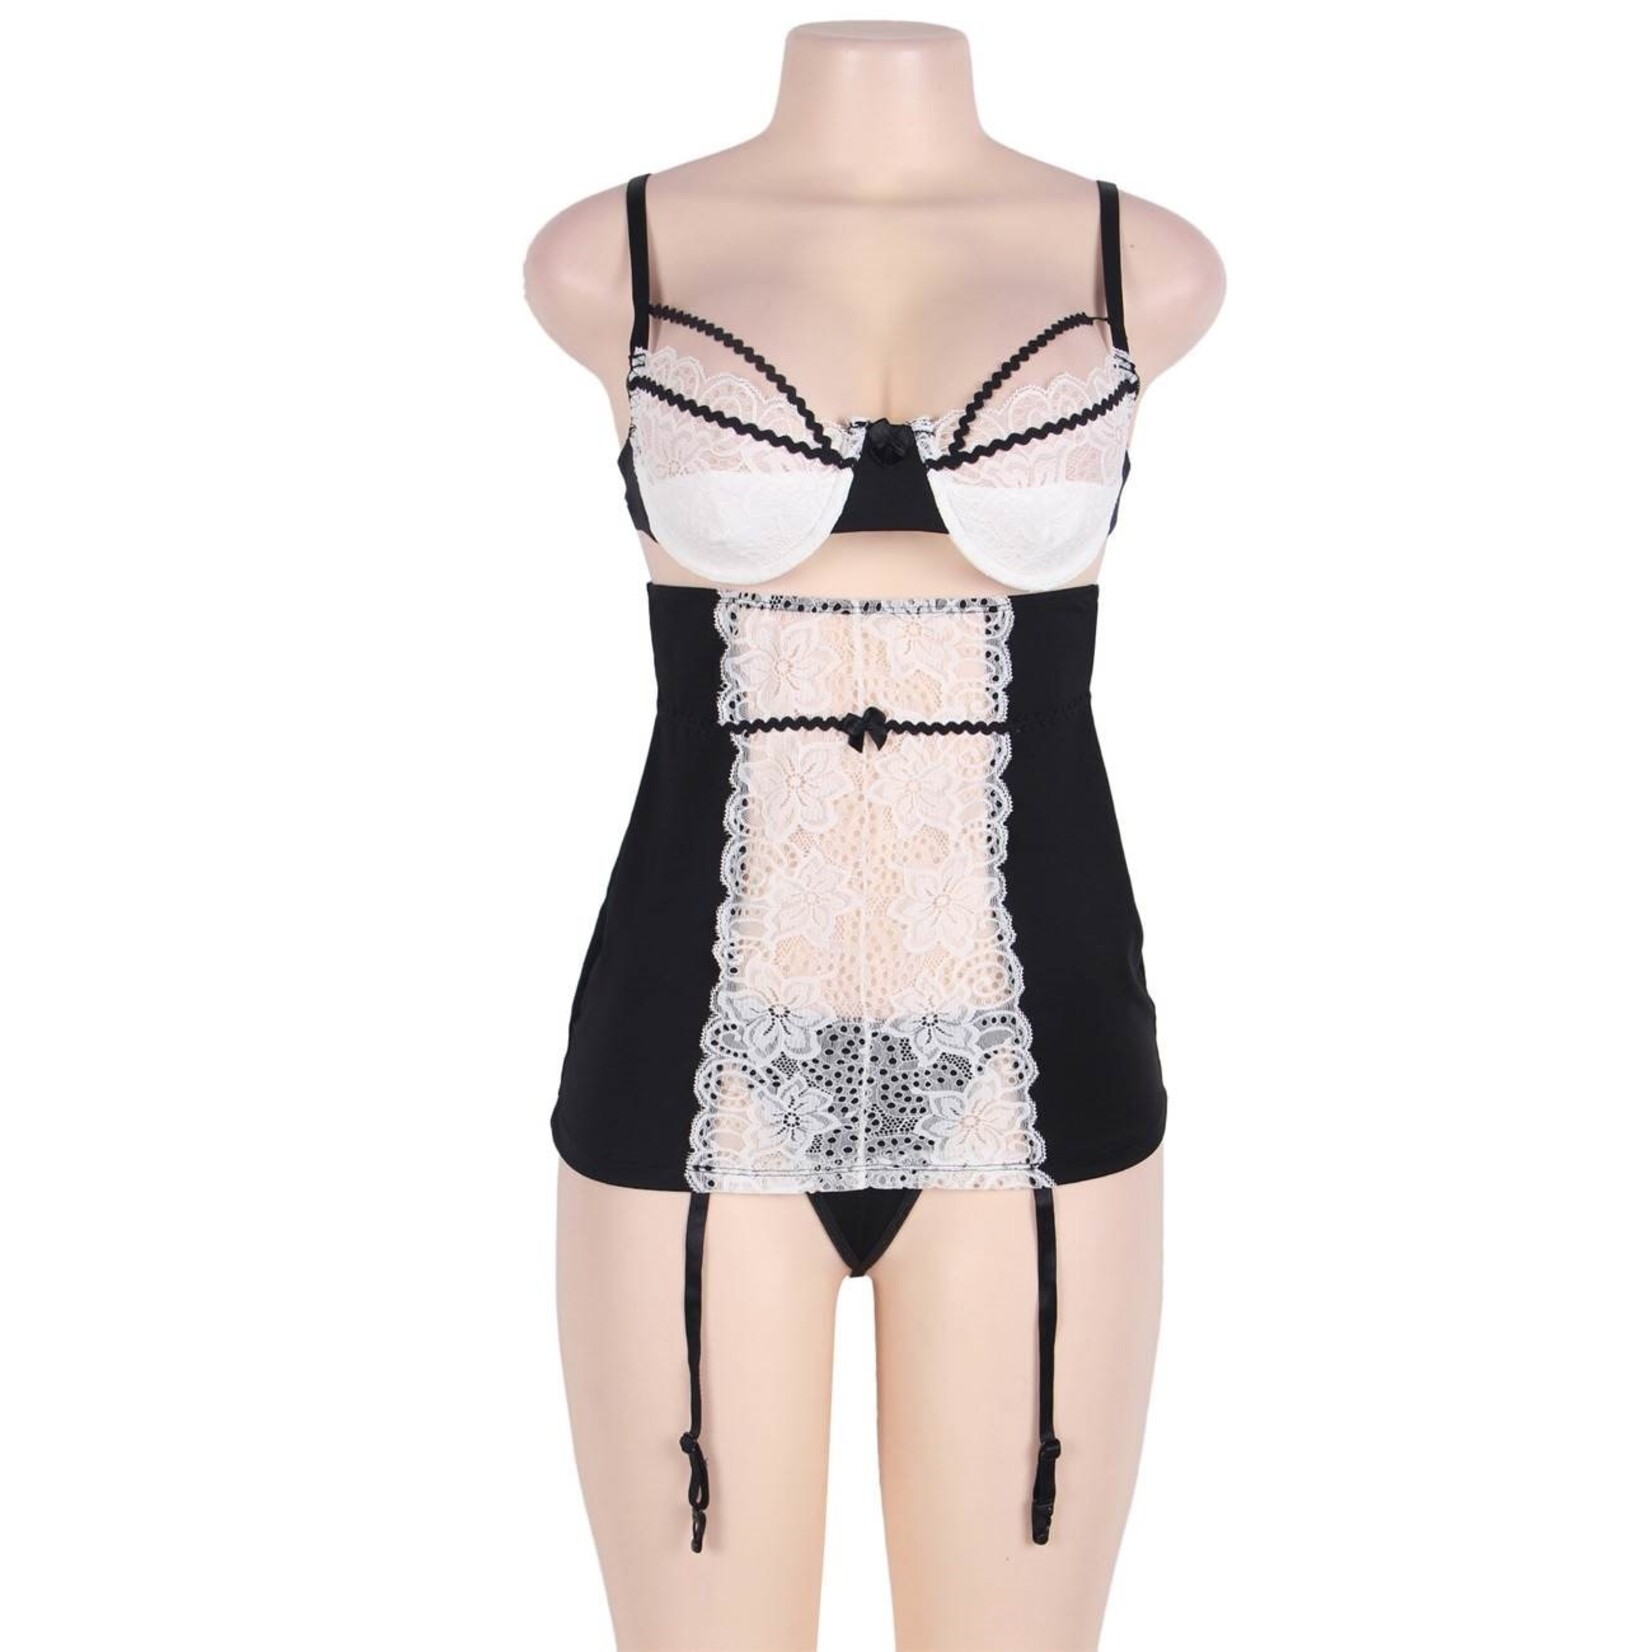 OH YEAH! -  BLACK AND WHITE LACE MESH SEXY LINGERIE XS-S